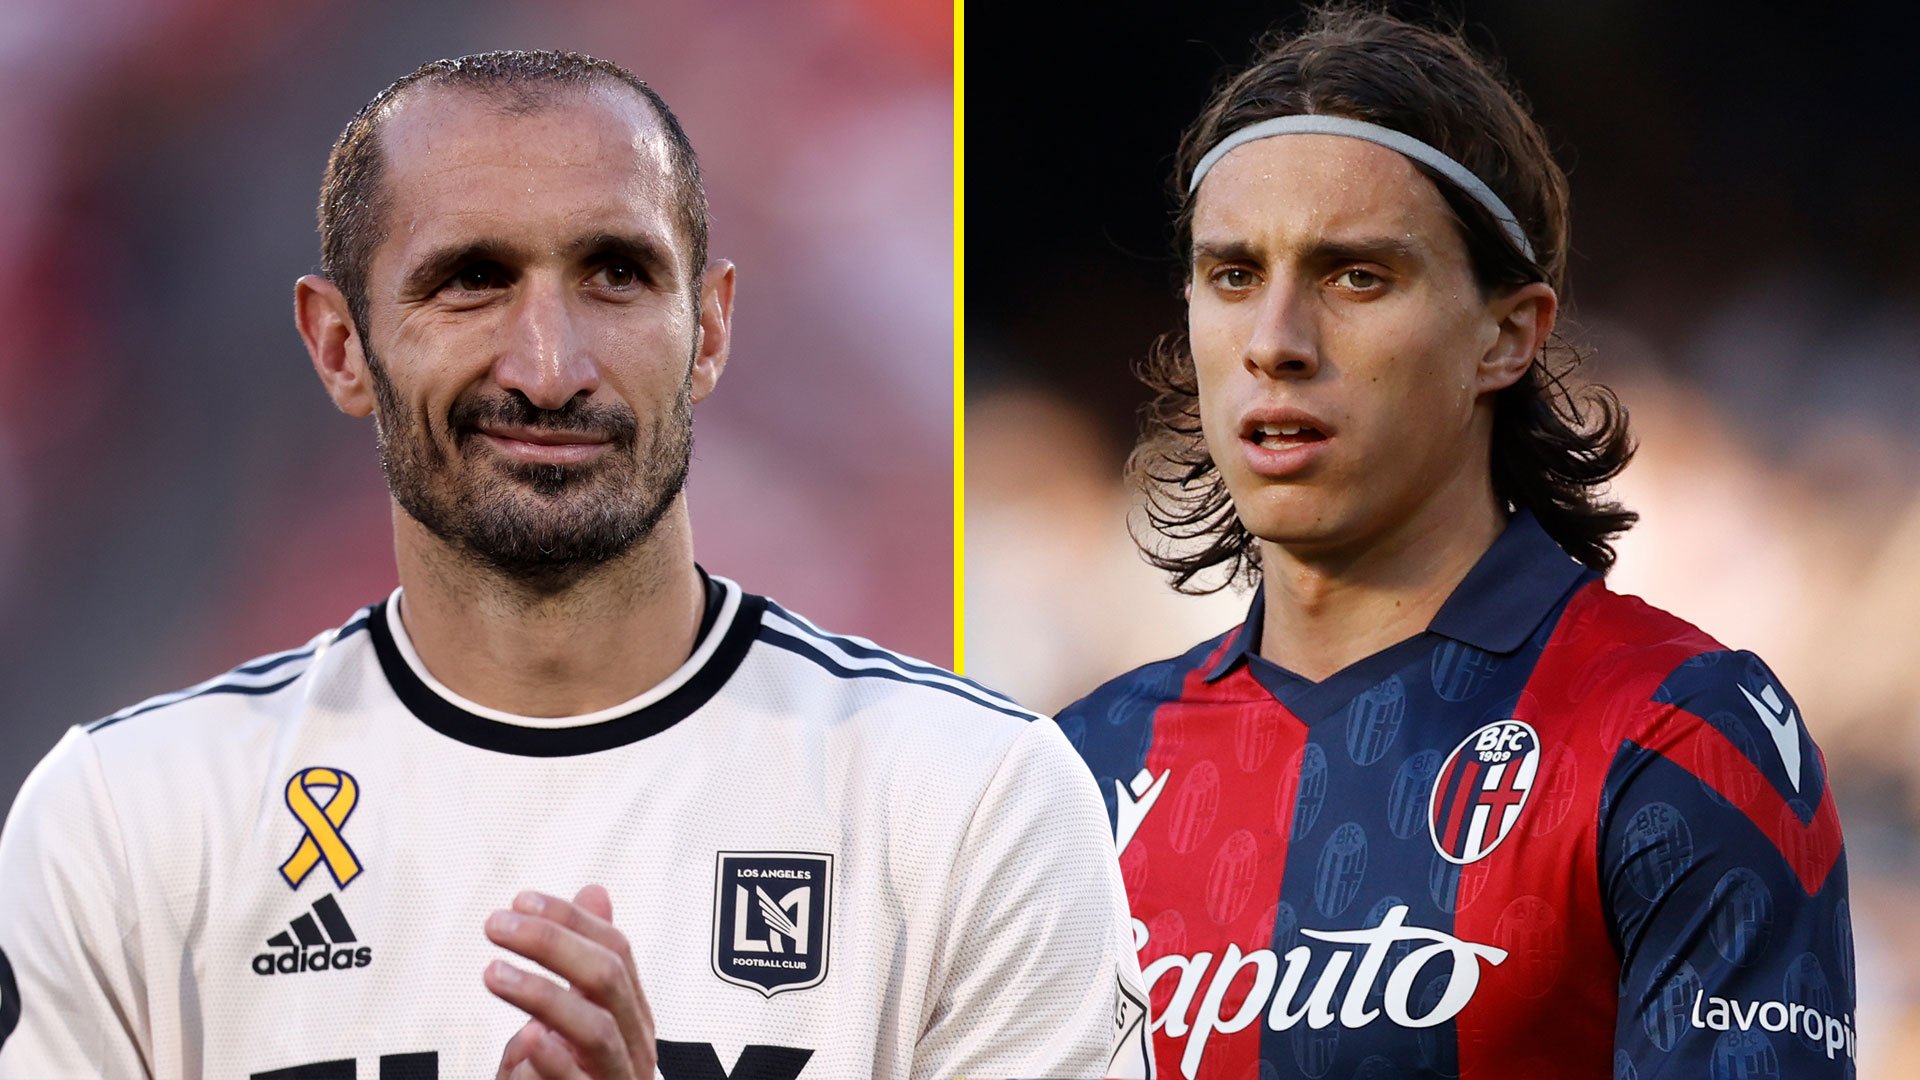 Arsenal missed out on signing Italy legend Giorgio Chiellini but could now learn from their mistakes with Riccardo Calafiori transfer